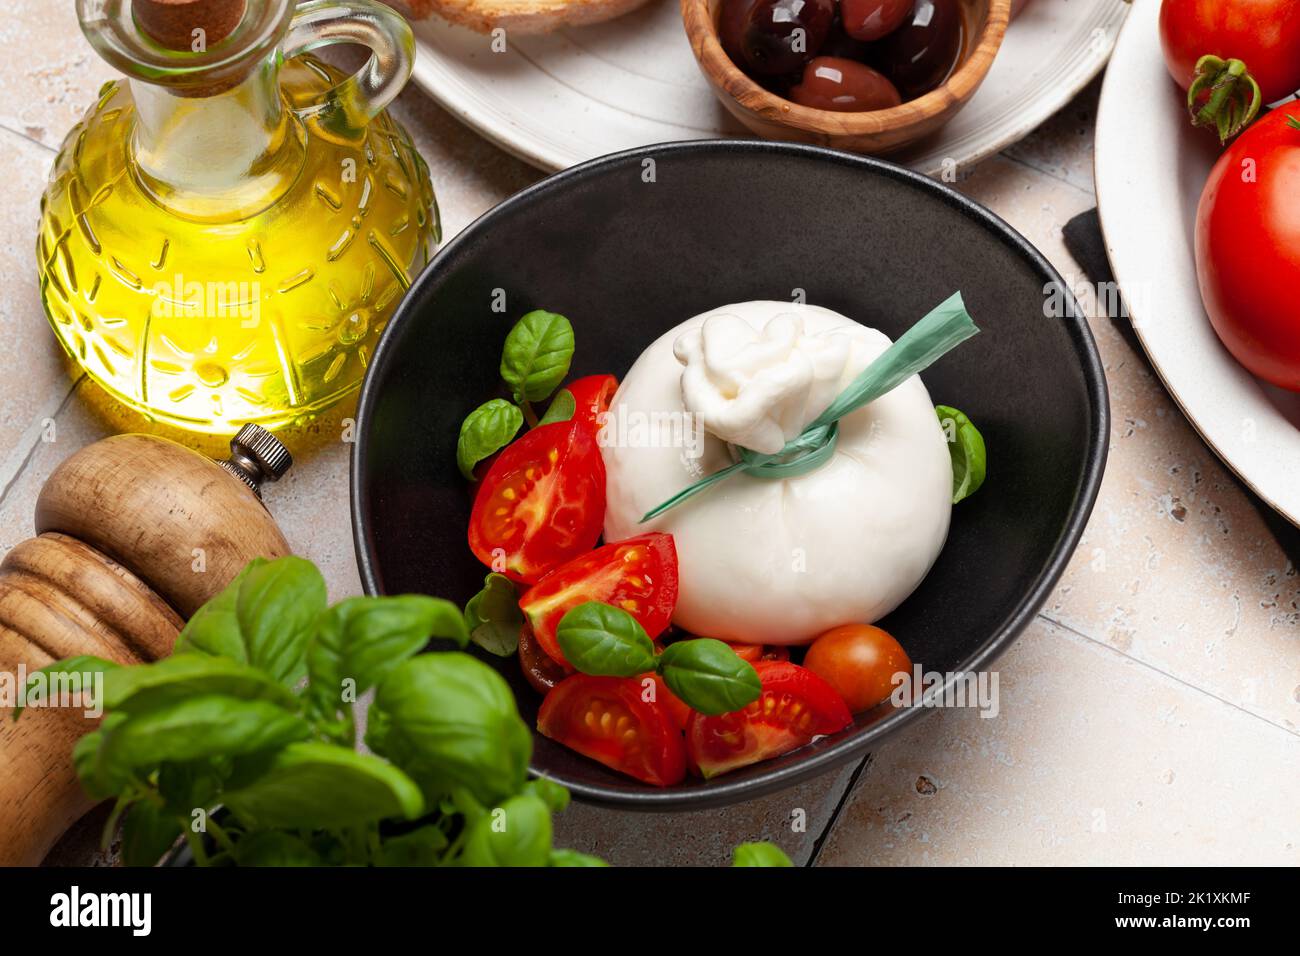 Burrata cheese, various tomatoes and olives. Italian cuisine Stock Photo